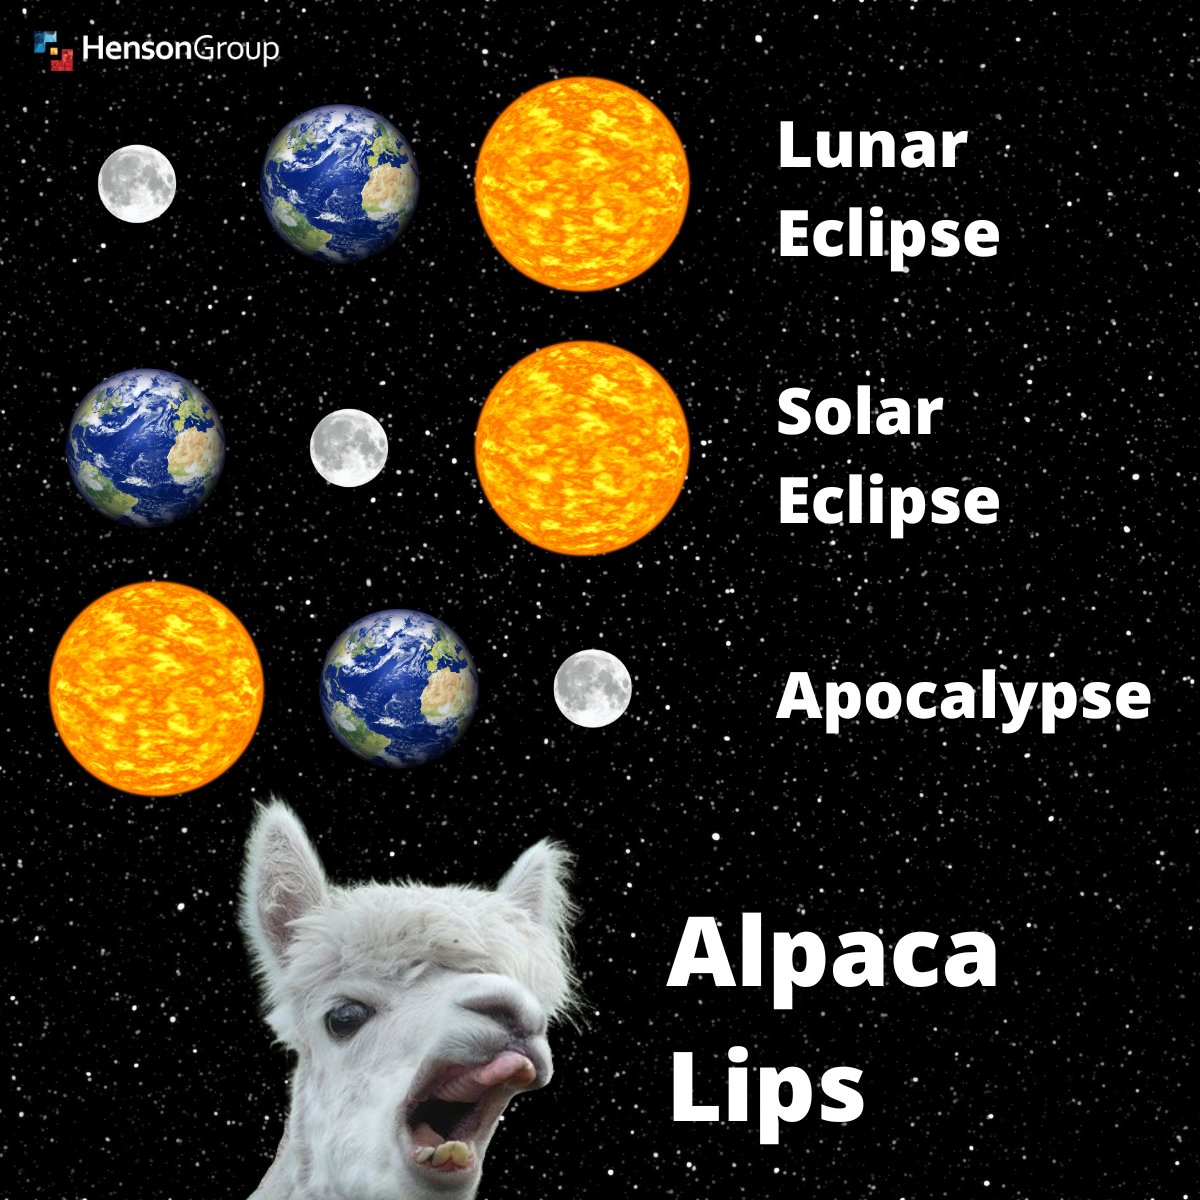 ☀ 🌑 If you're watching today's Solar Eclipse, let's set the record straight with Eclipses 101! 😂 

#EclipseFacts #AlpacaLips #SmileMore #Microsoft #HensonGroup #IngramMicroCloud